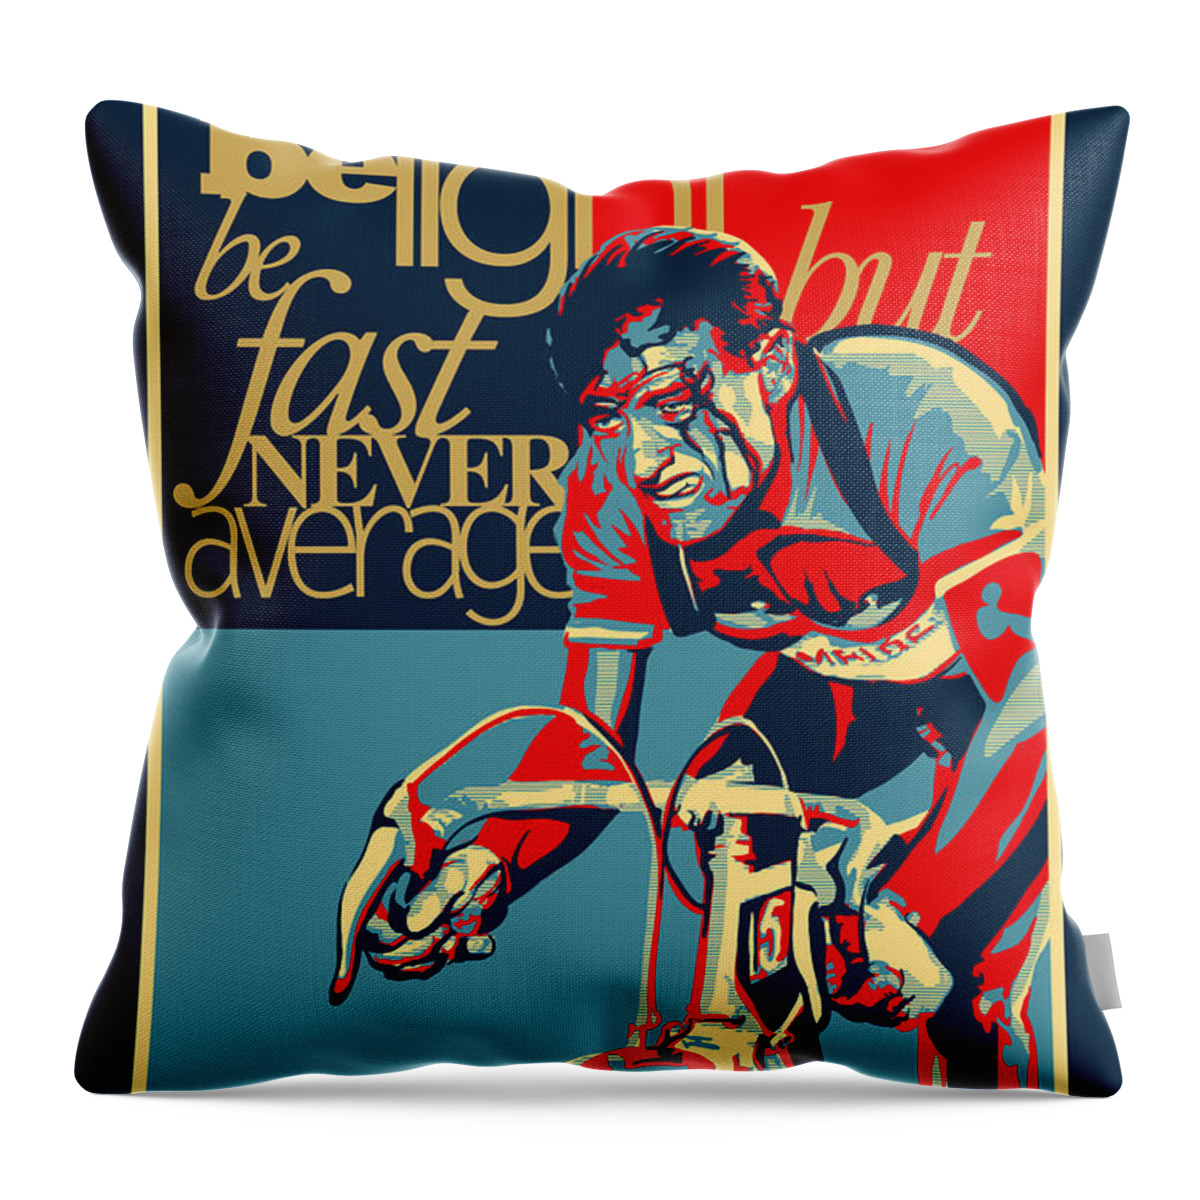 Vintage Tour De France Throw Pillow featuring the painting Hard as Nails vintage cycling poster by Sassan Filsoof